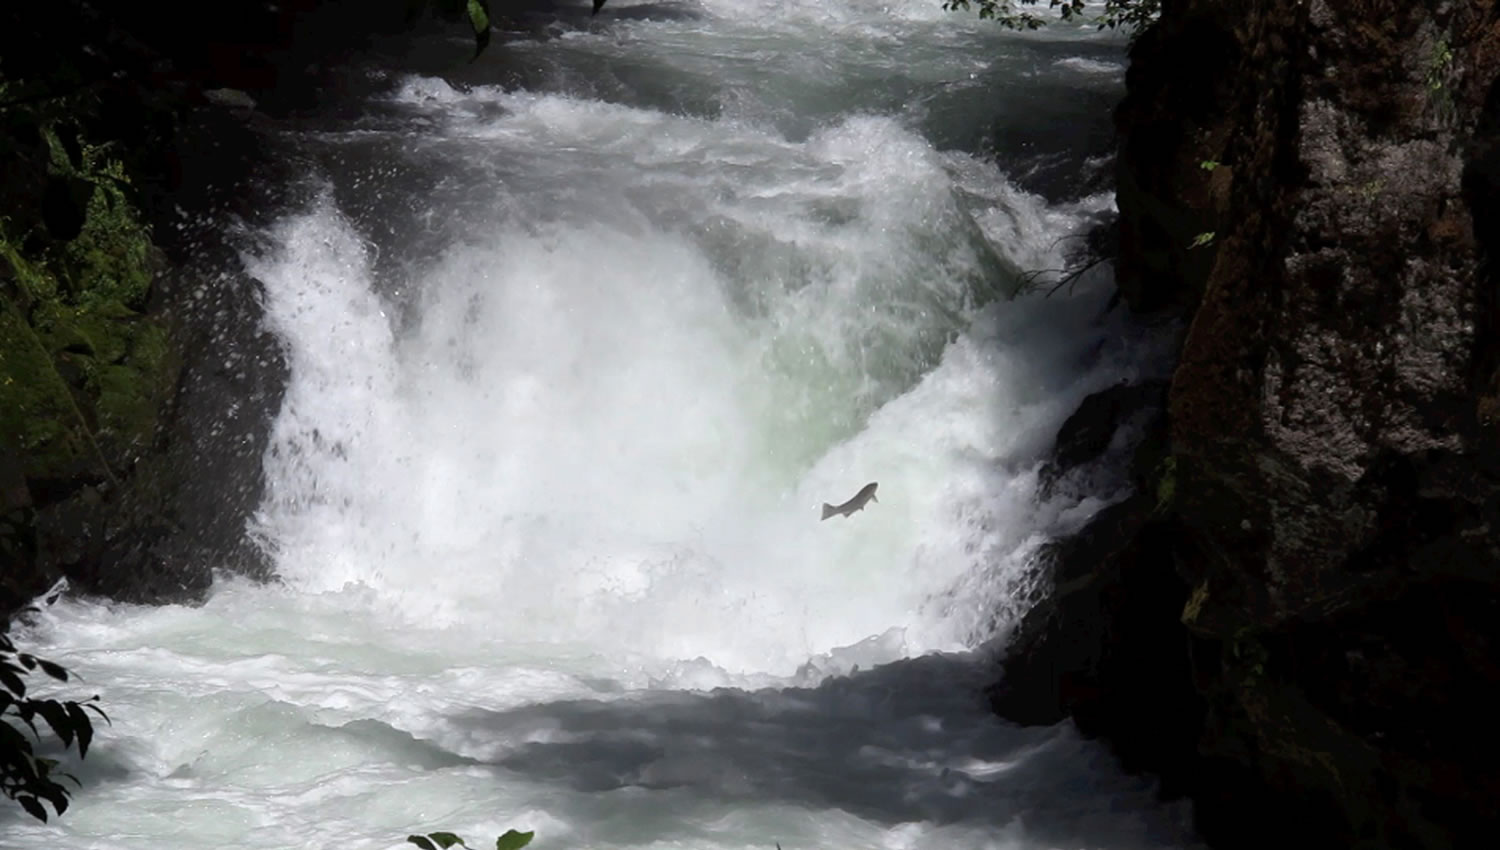 Wildlife officials have confirmed the presence of migrating fish -- likely steelhead -- in the White Salmon River upstream of Condit Dam. This photo was taken Monday at BZ Falls, about 12 miles above the river's mouth at the Columbia River.